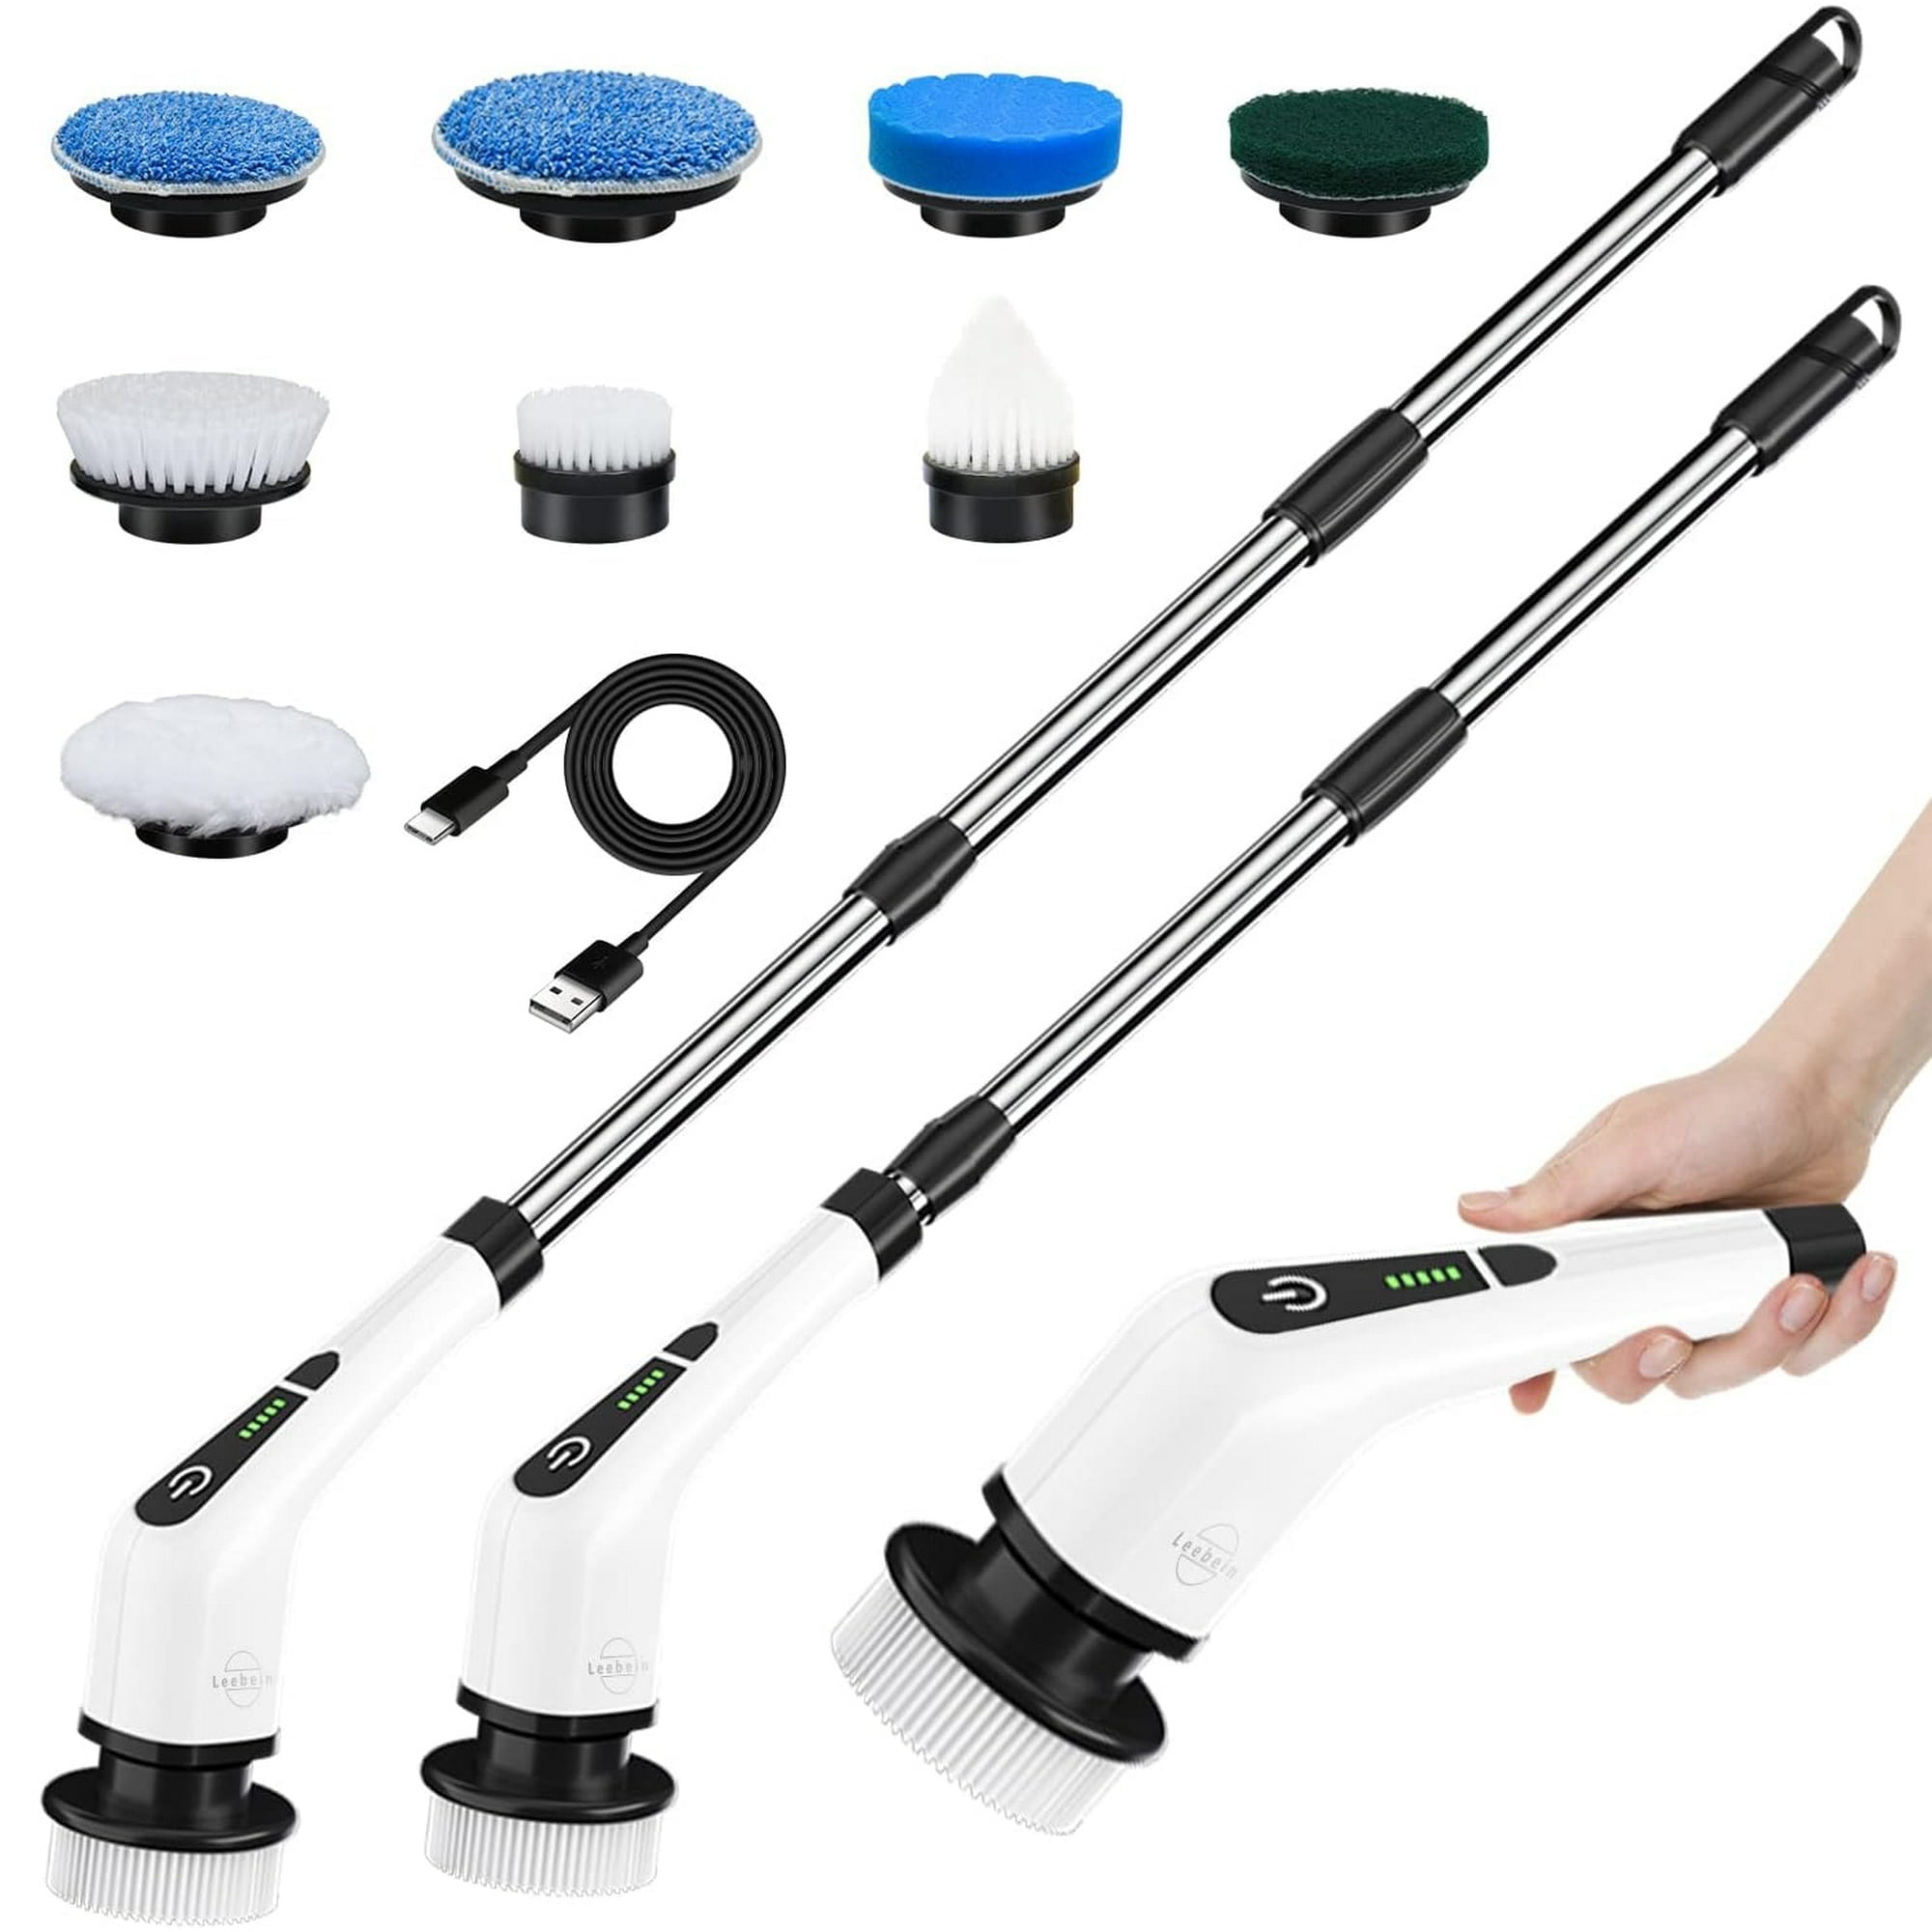 BIUBLE Electric Spin Scrubber, Cordless Power, Bathroom Scrubber with 8  Replaceable Cleaning Brush Heads - Cleaning Floor, Bathroom, Kitchen,  Bottle